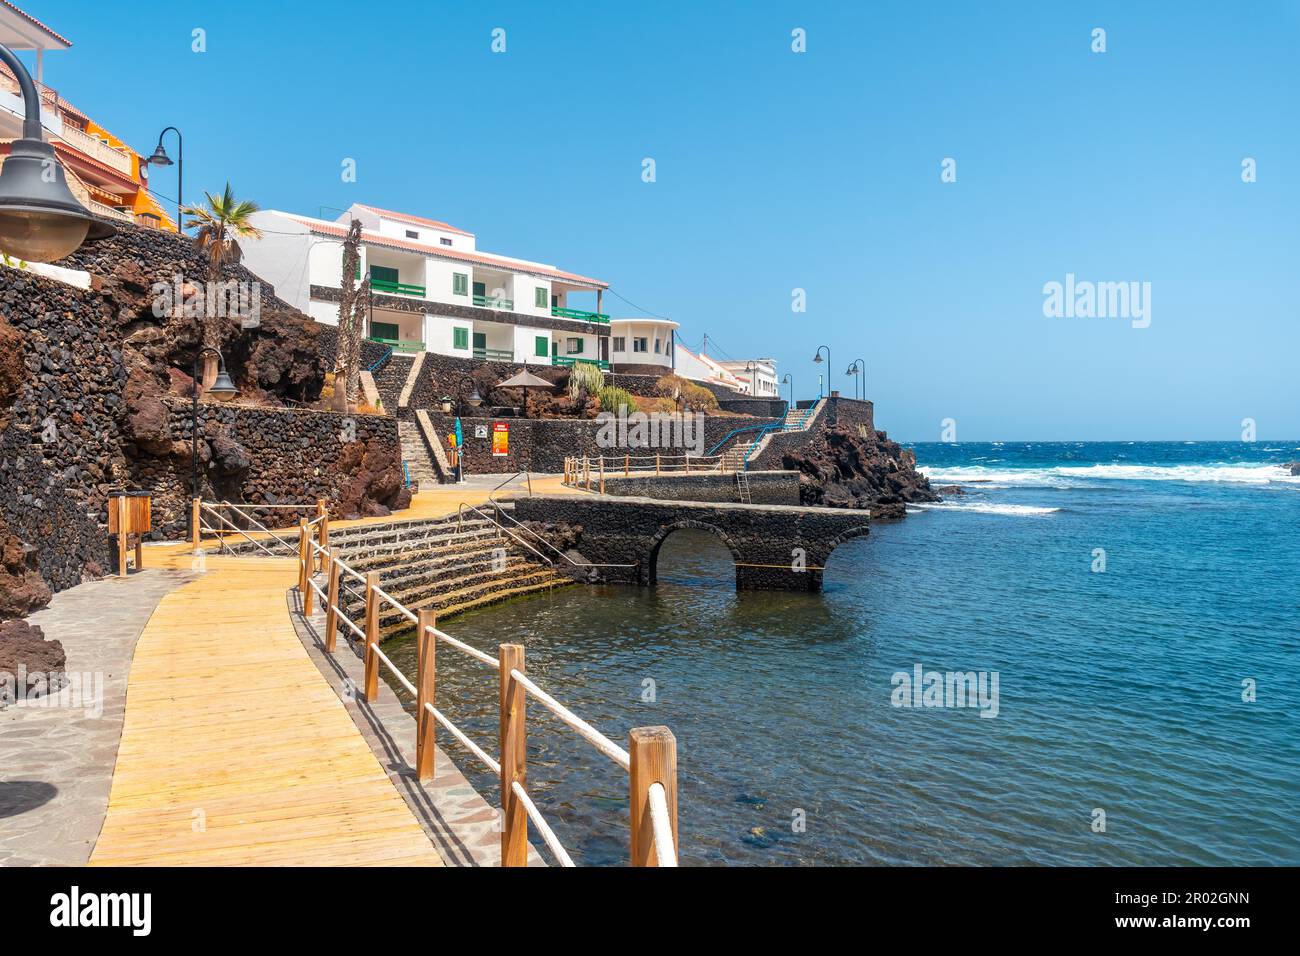 Promenade by the sea in the village of Tamaduste on the island of El Hierro, Canary Islands, Spain Stock Photo